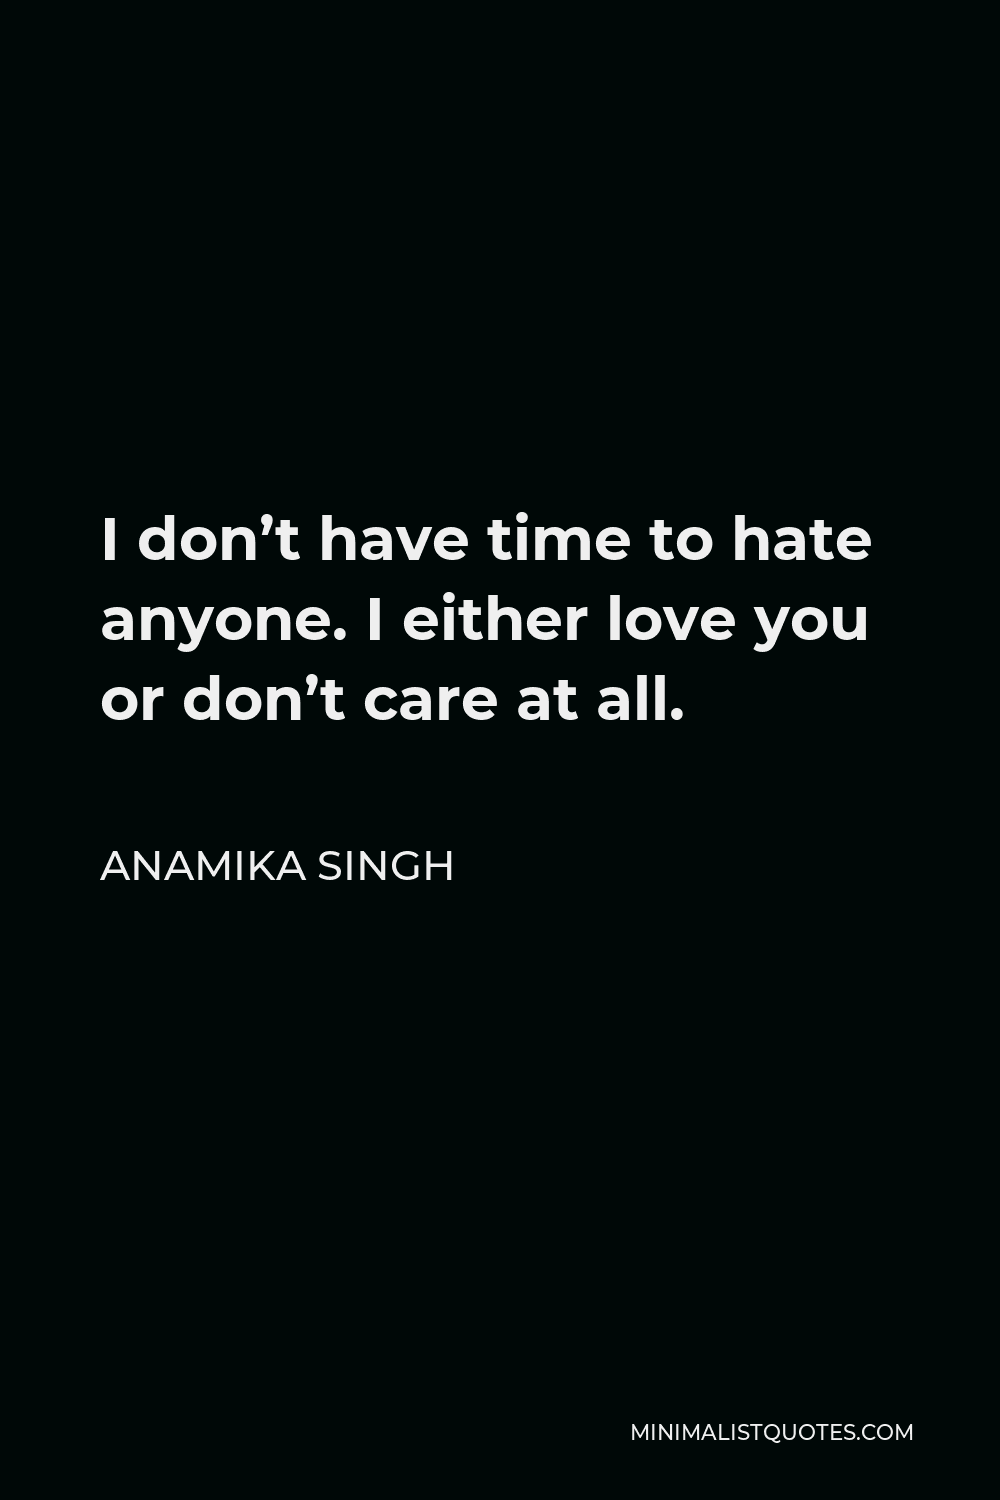 Anamika Singh Quote - I don’t have time to hate anyone. I either love you or don’t care at all.